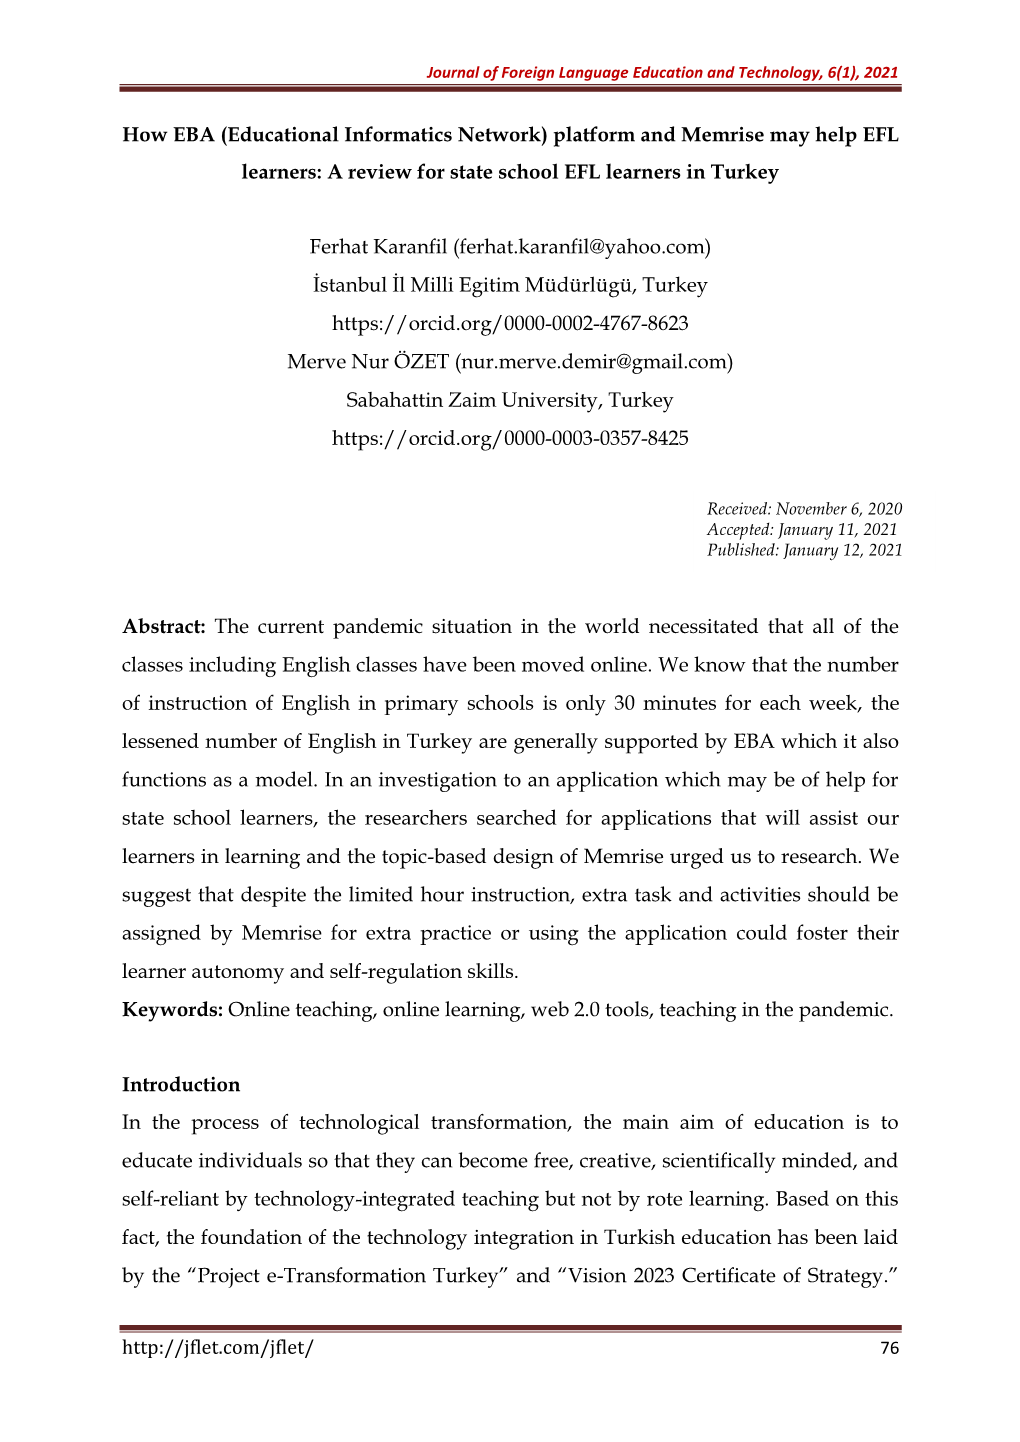 (Educational Informatics Network) Platform and Memrise May Help EFL Learners: a Review for State School EFL Learners in Turkey